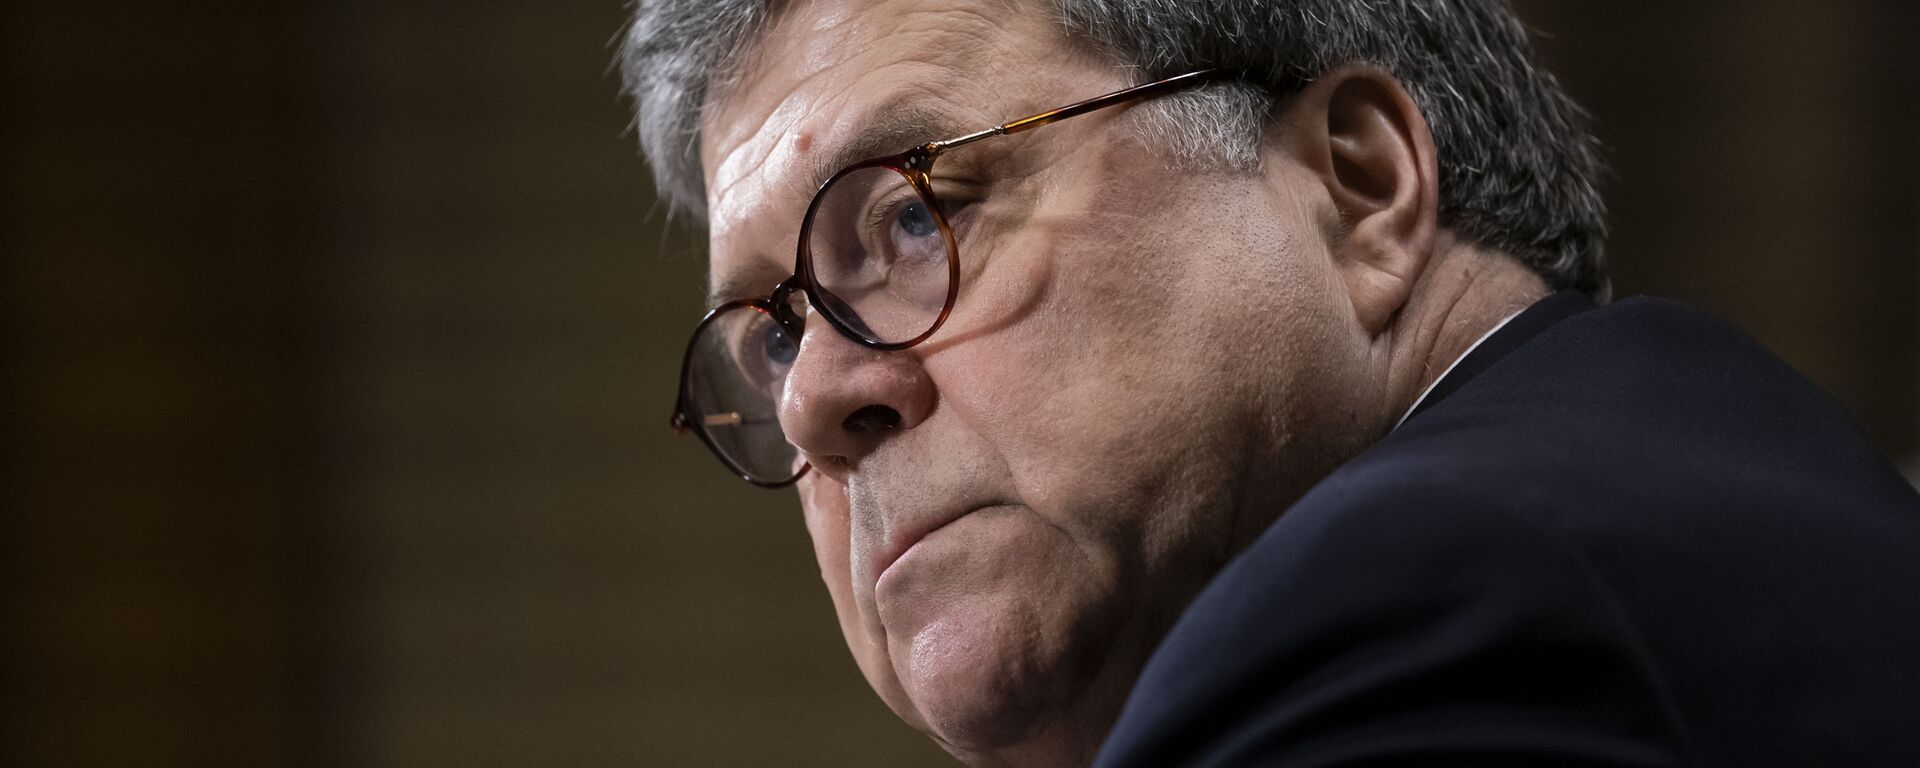 Attorney General William Barr testifies before the Senate Judiciary Committee about the Russia report by special counsel Robert Mueller on Capitol Hill in Washington, Wednesday, May 1, 2019 - Sputnik International, 1920, 12.03.2022